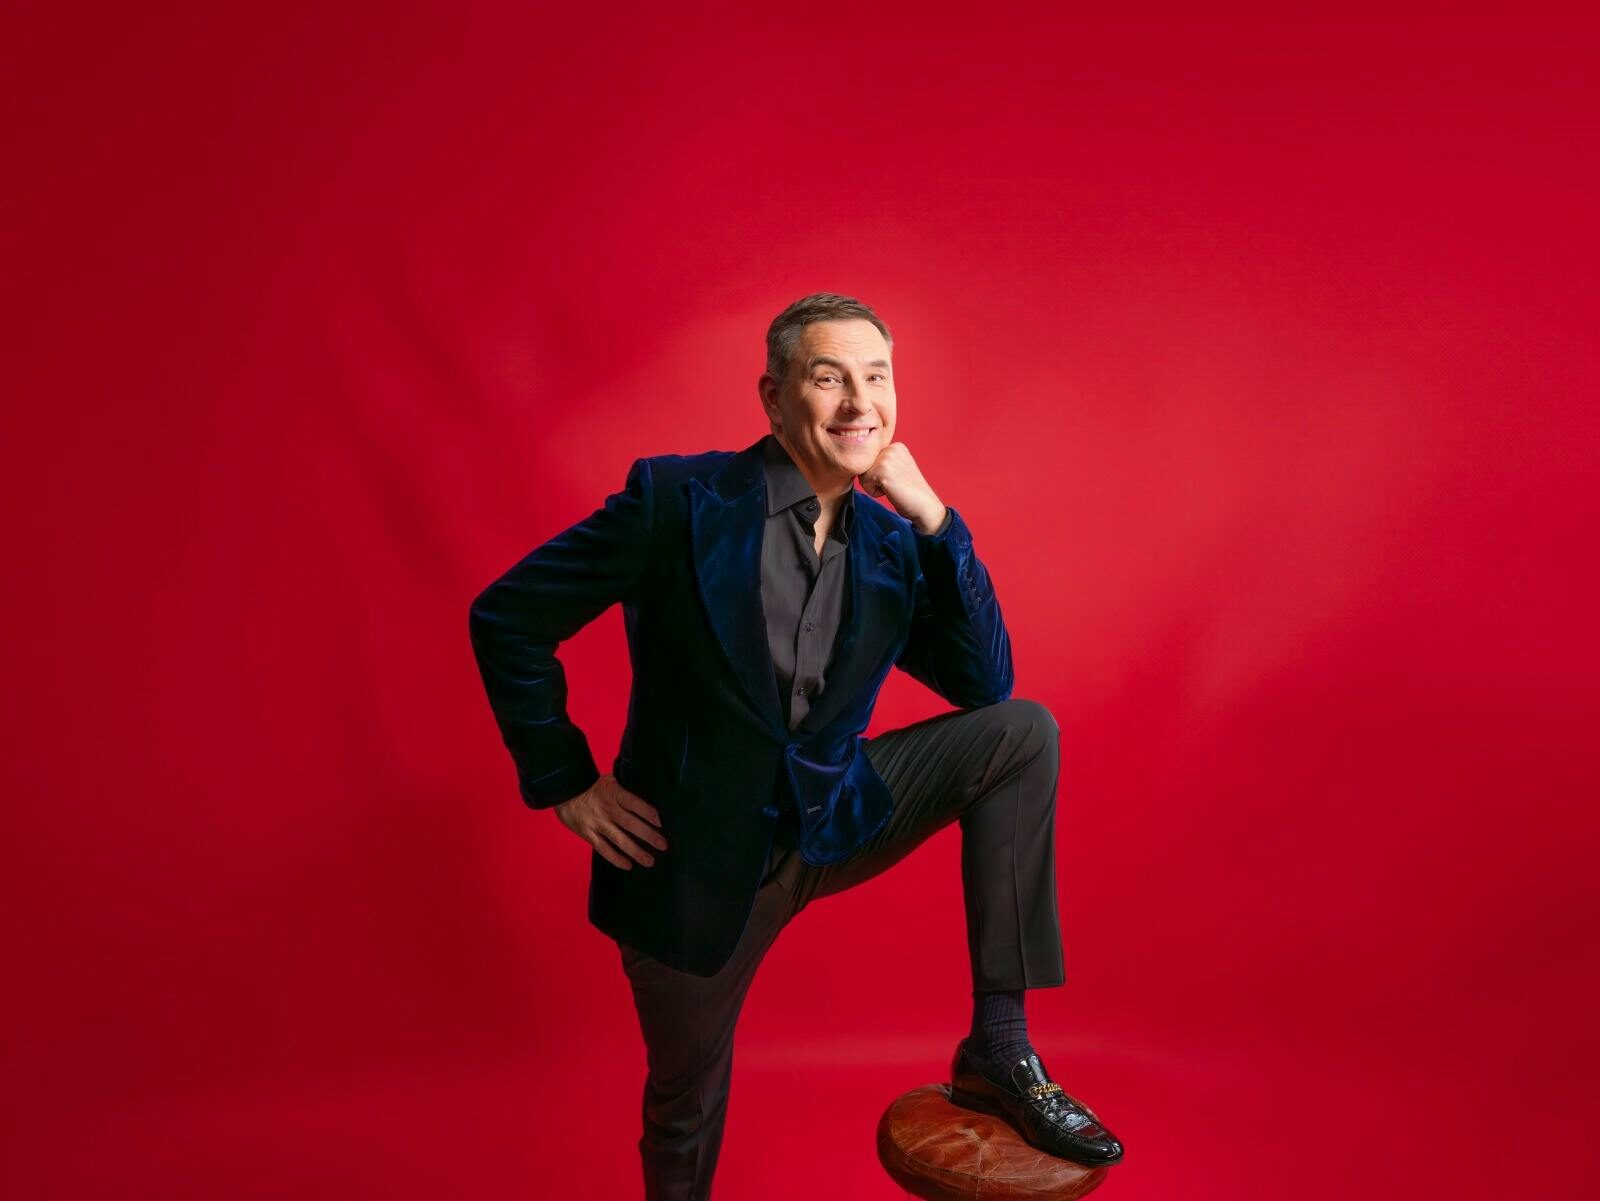 David Walliams behind a red background with his leg on a stool leaning on his knee smiling in a suit